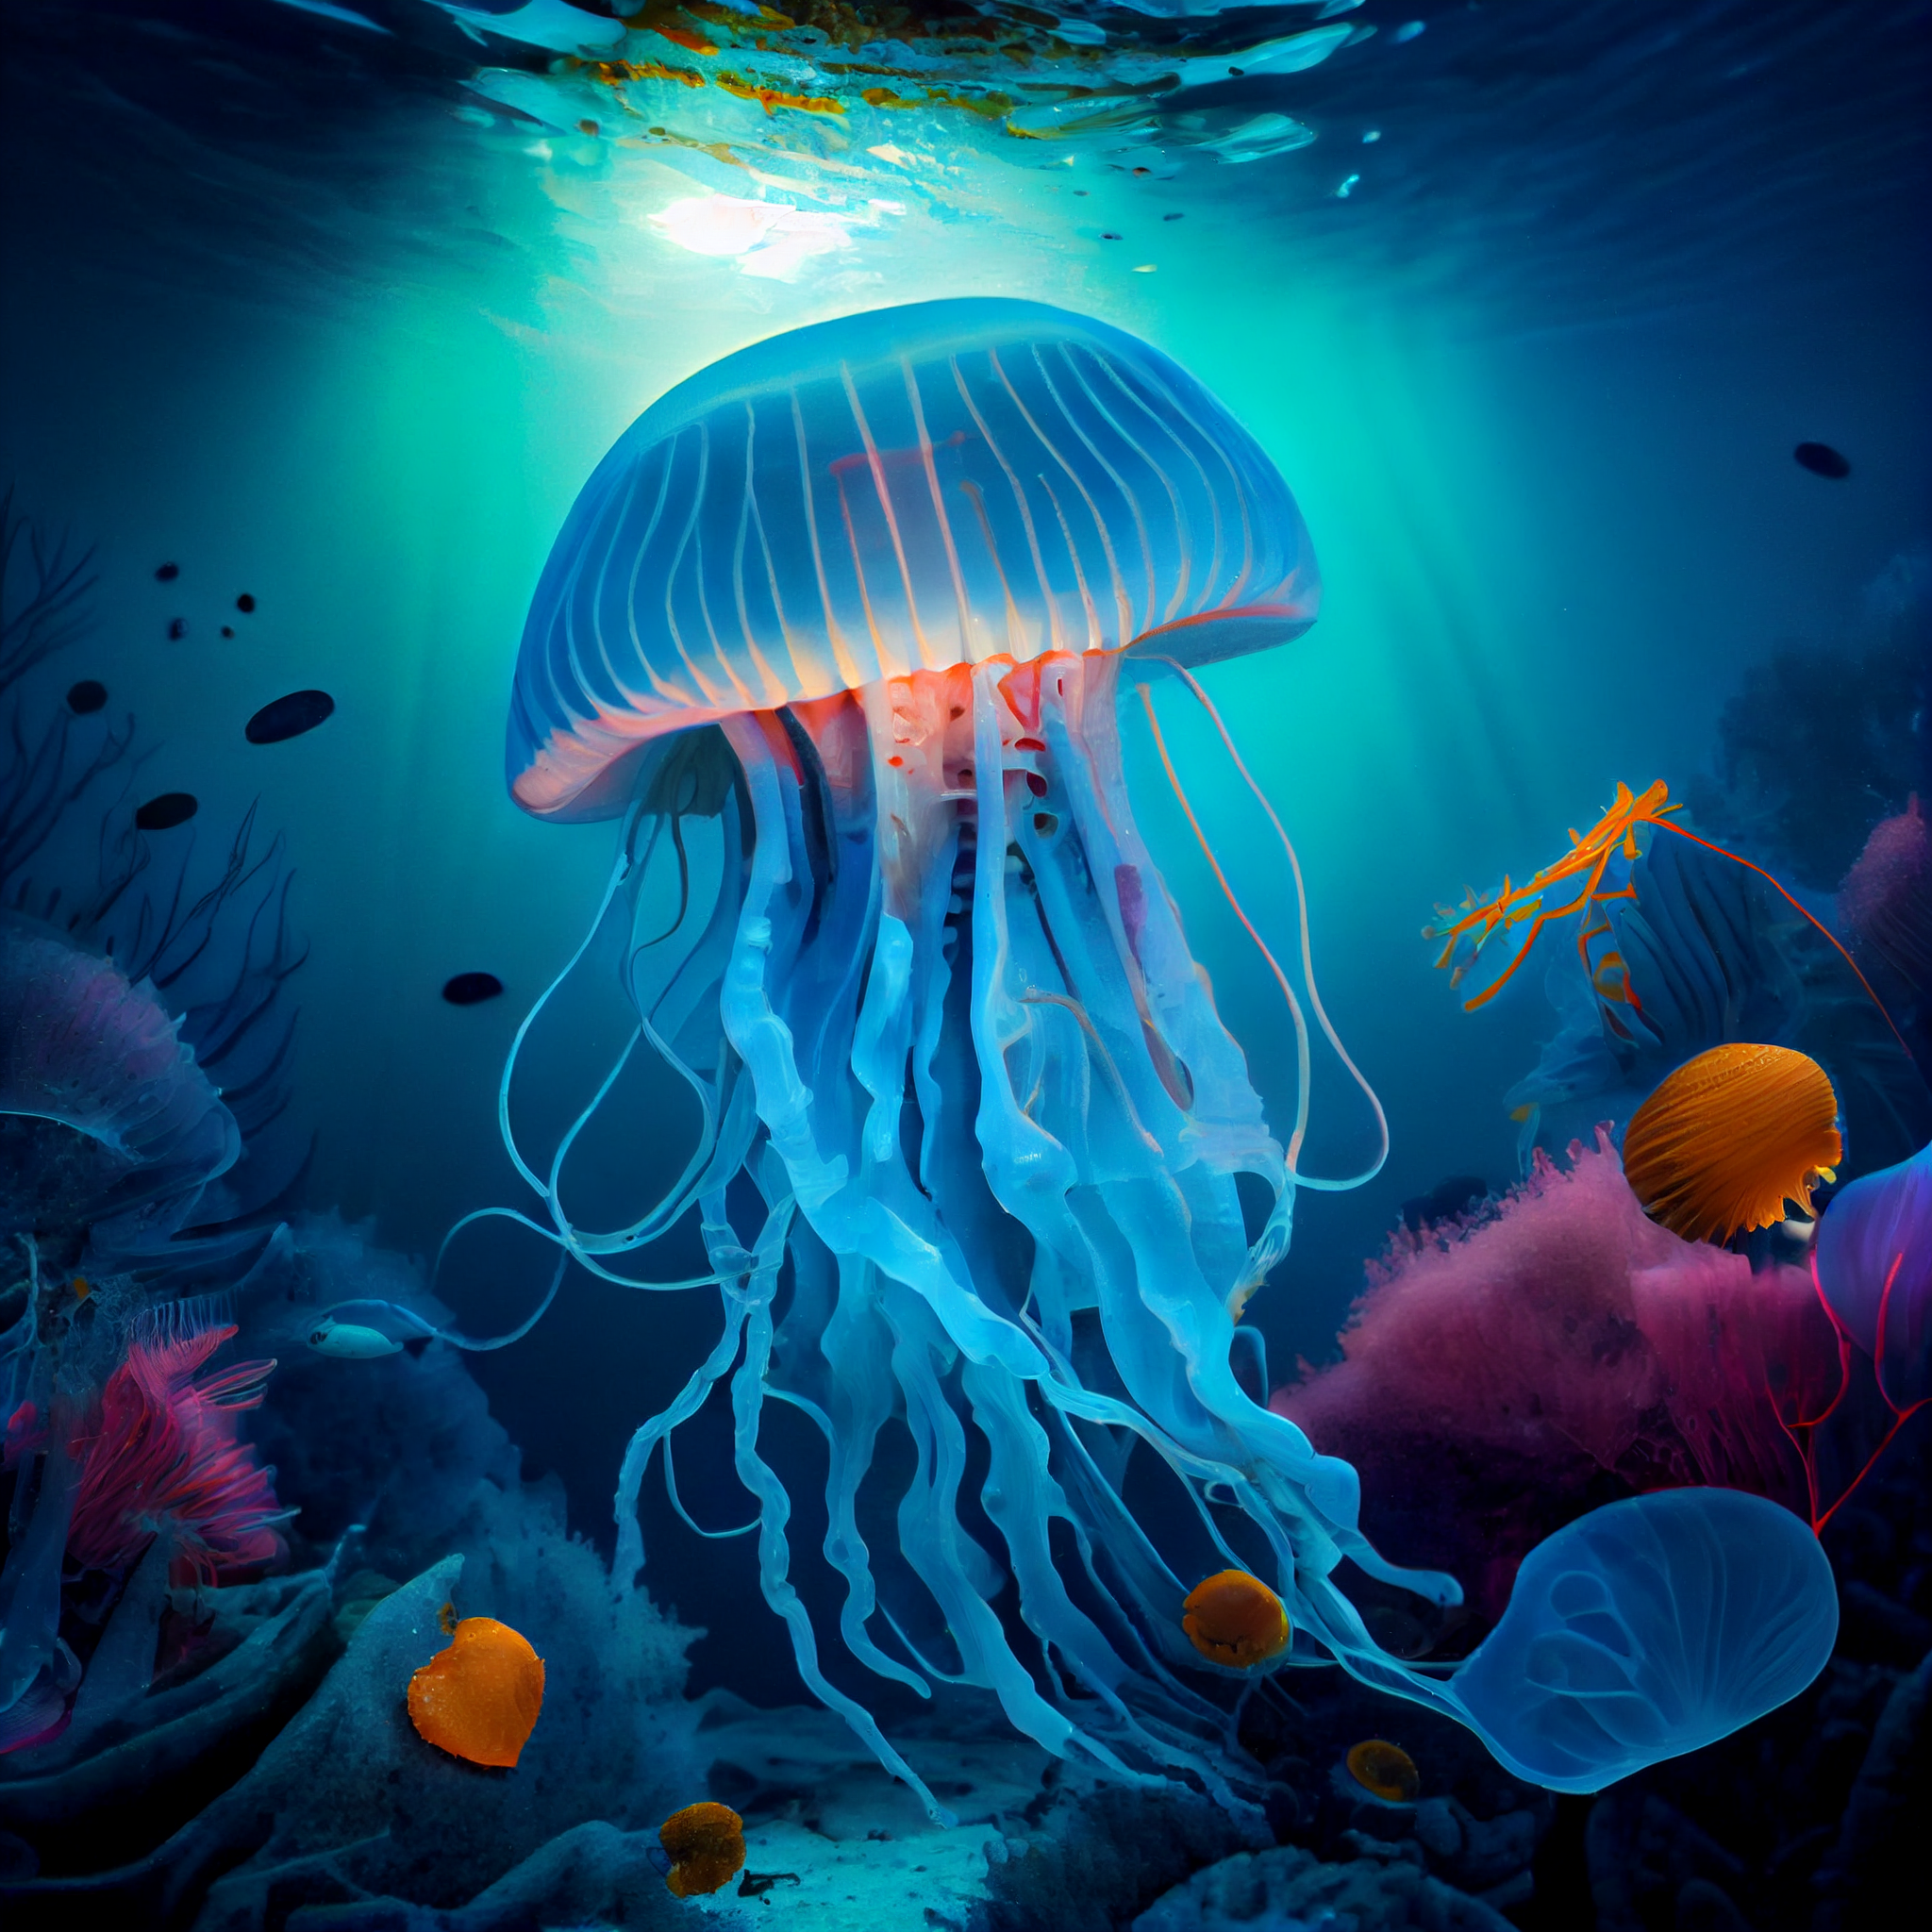 Dive into Tranquility with Our Mesmerizing Jellyfish Art Print